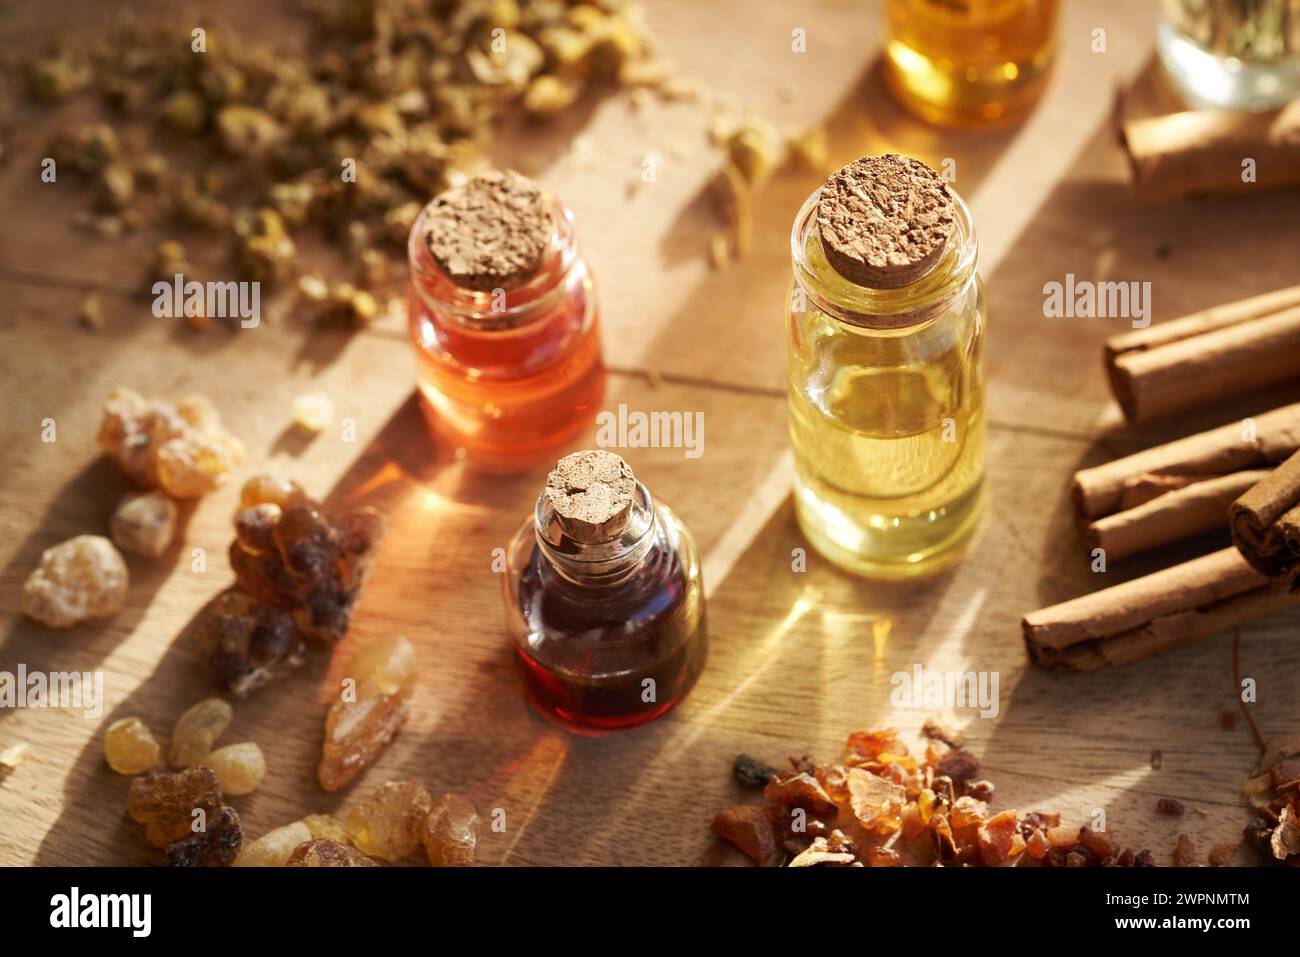 Bottles of aromatherapy essential oils with frankincense and myrrh resin, cinnamon and dried herbs Stock Photo